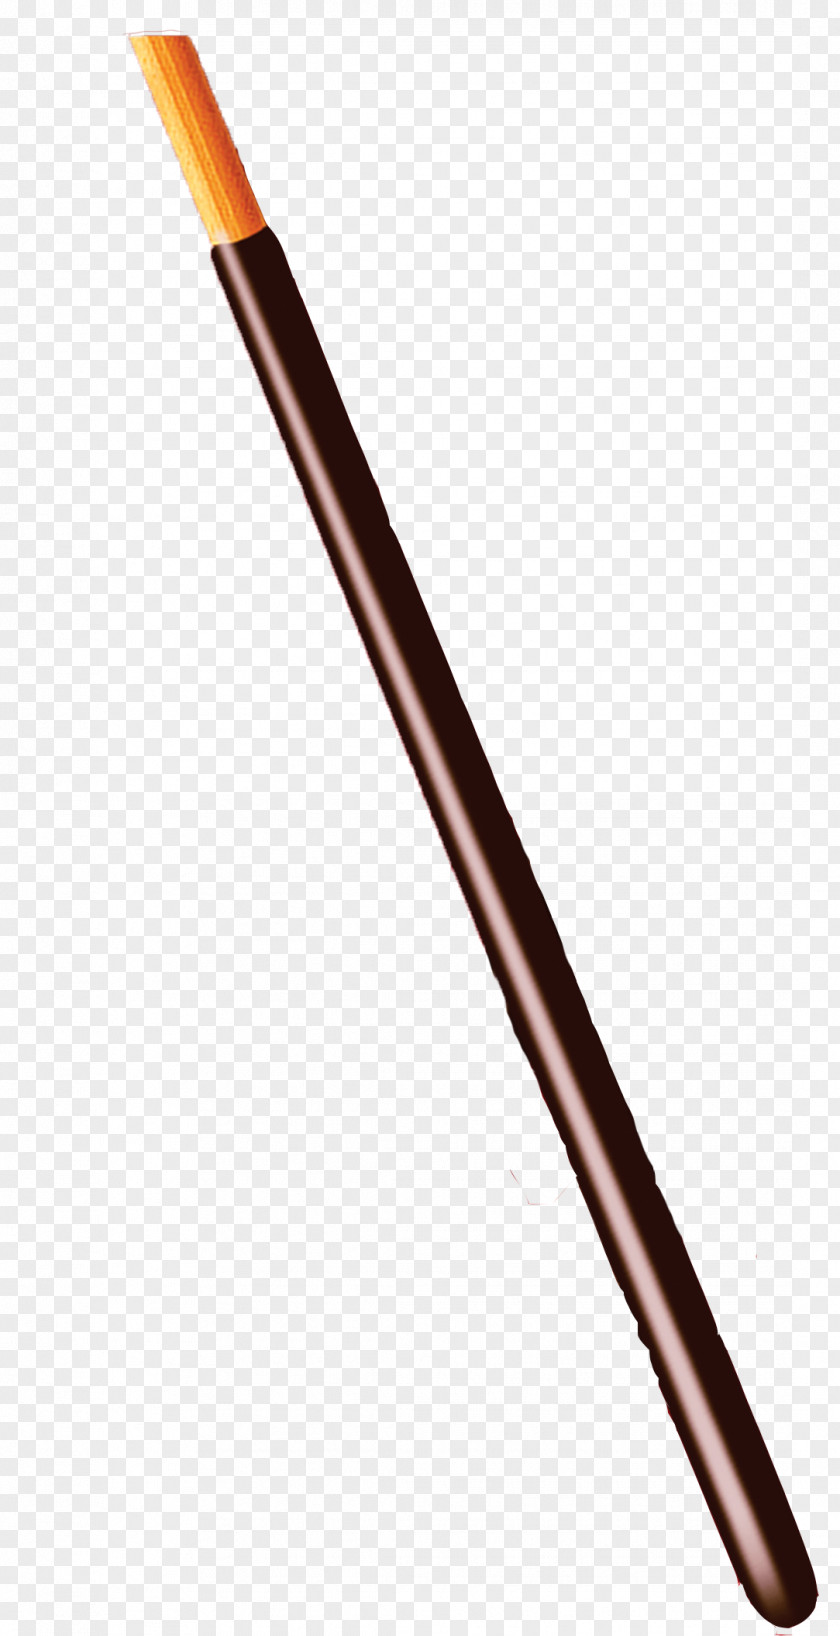 Stick The Wizarding World Of Harry Potter Porpentina Goldstein Wand PNG